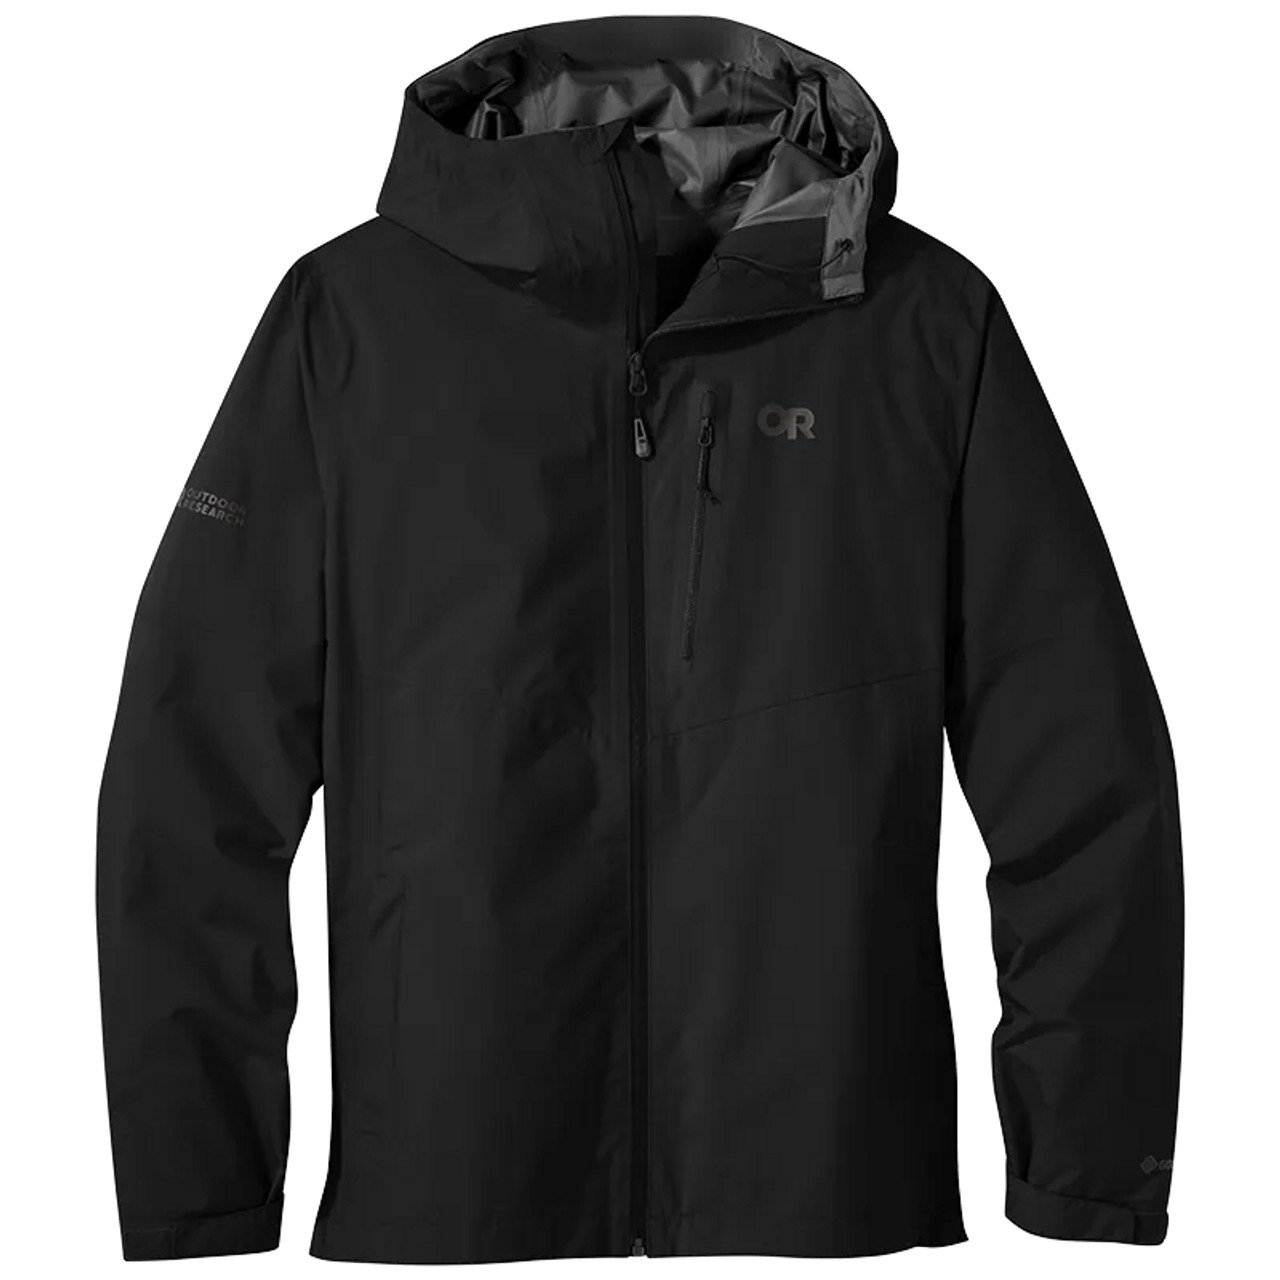 Outdoor Research Archangel Review: GORE-TEX Pro for Stretch in a